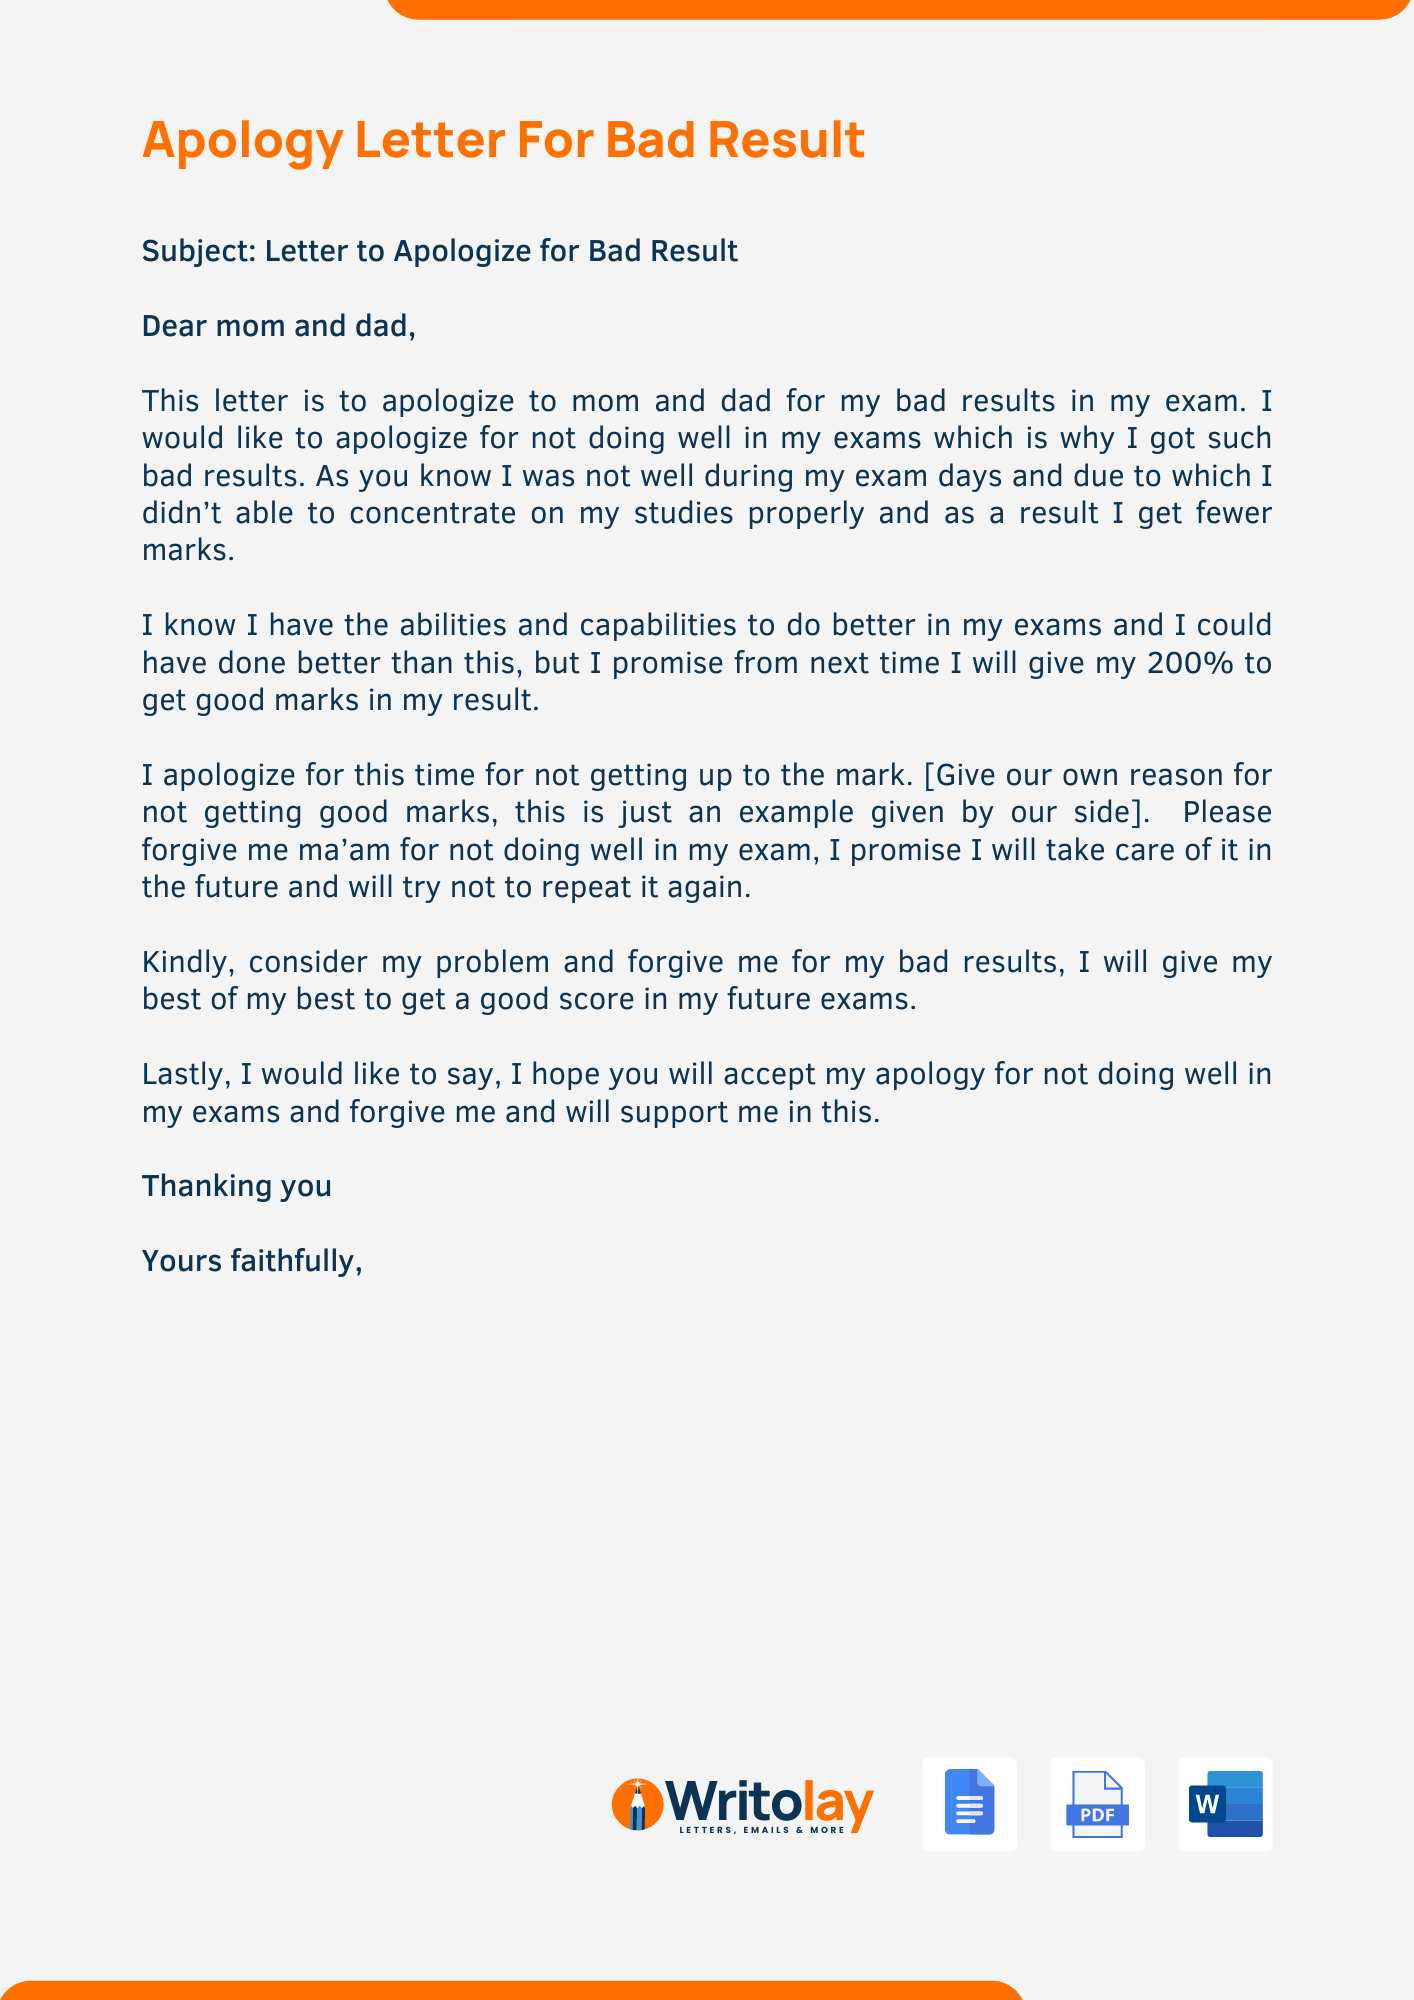 Apology Letter for Bad Result 4 Templates Writolay